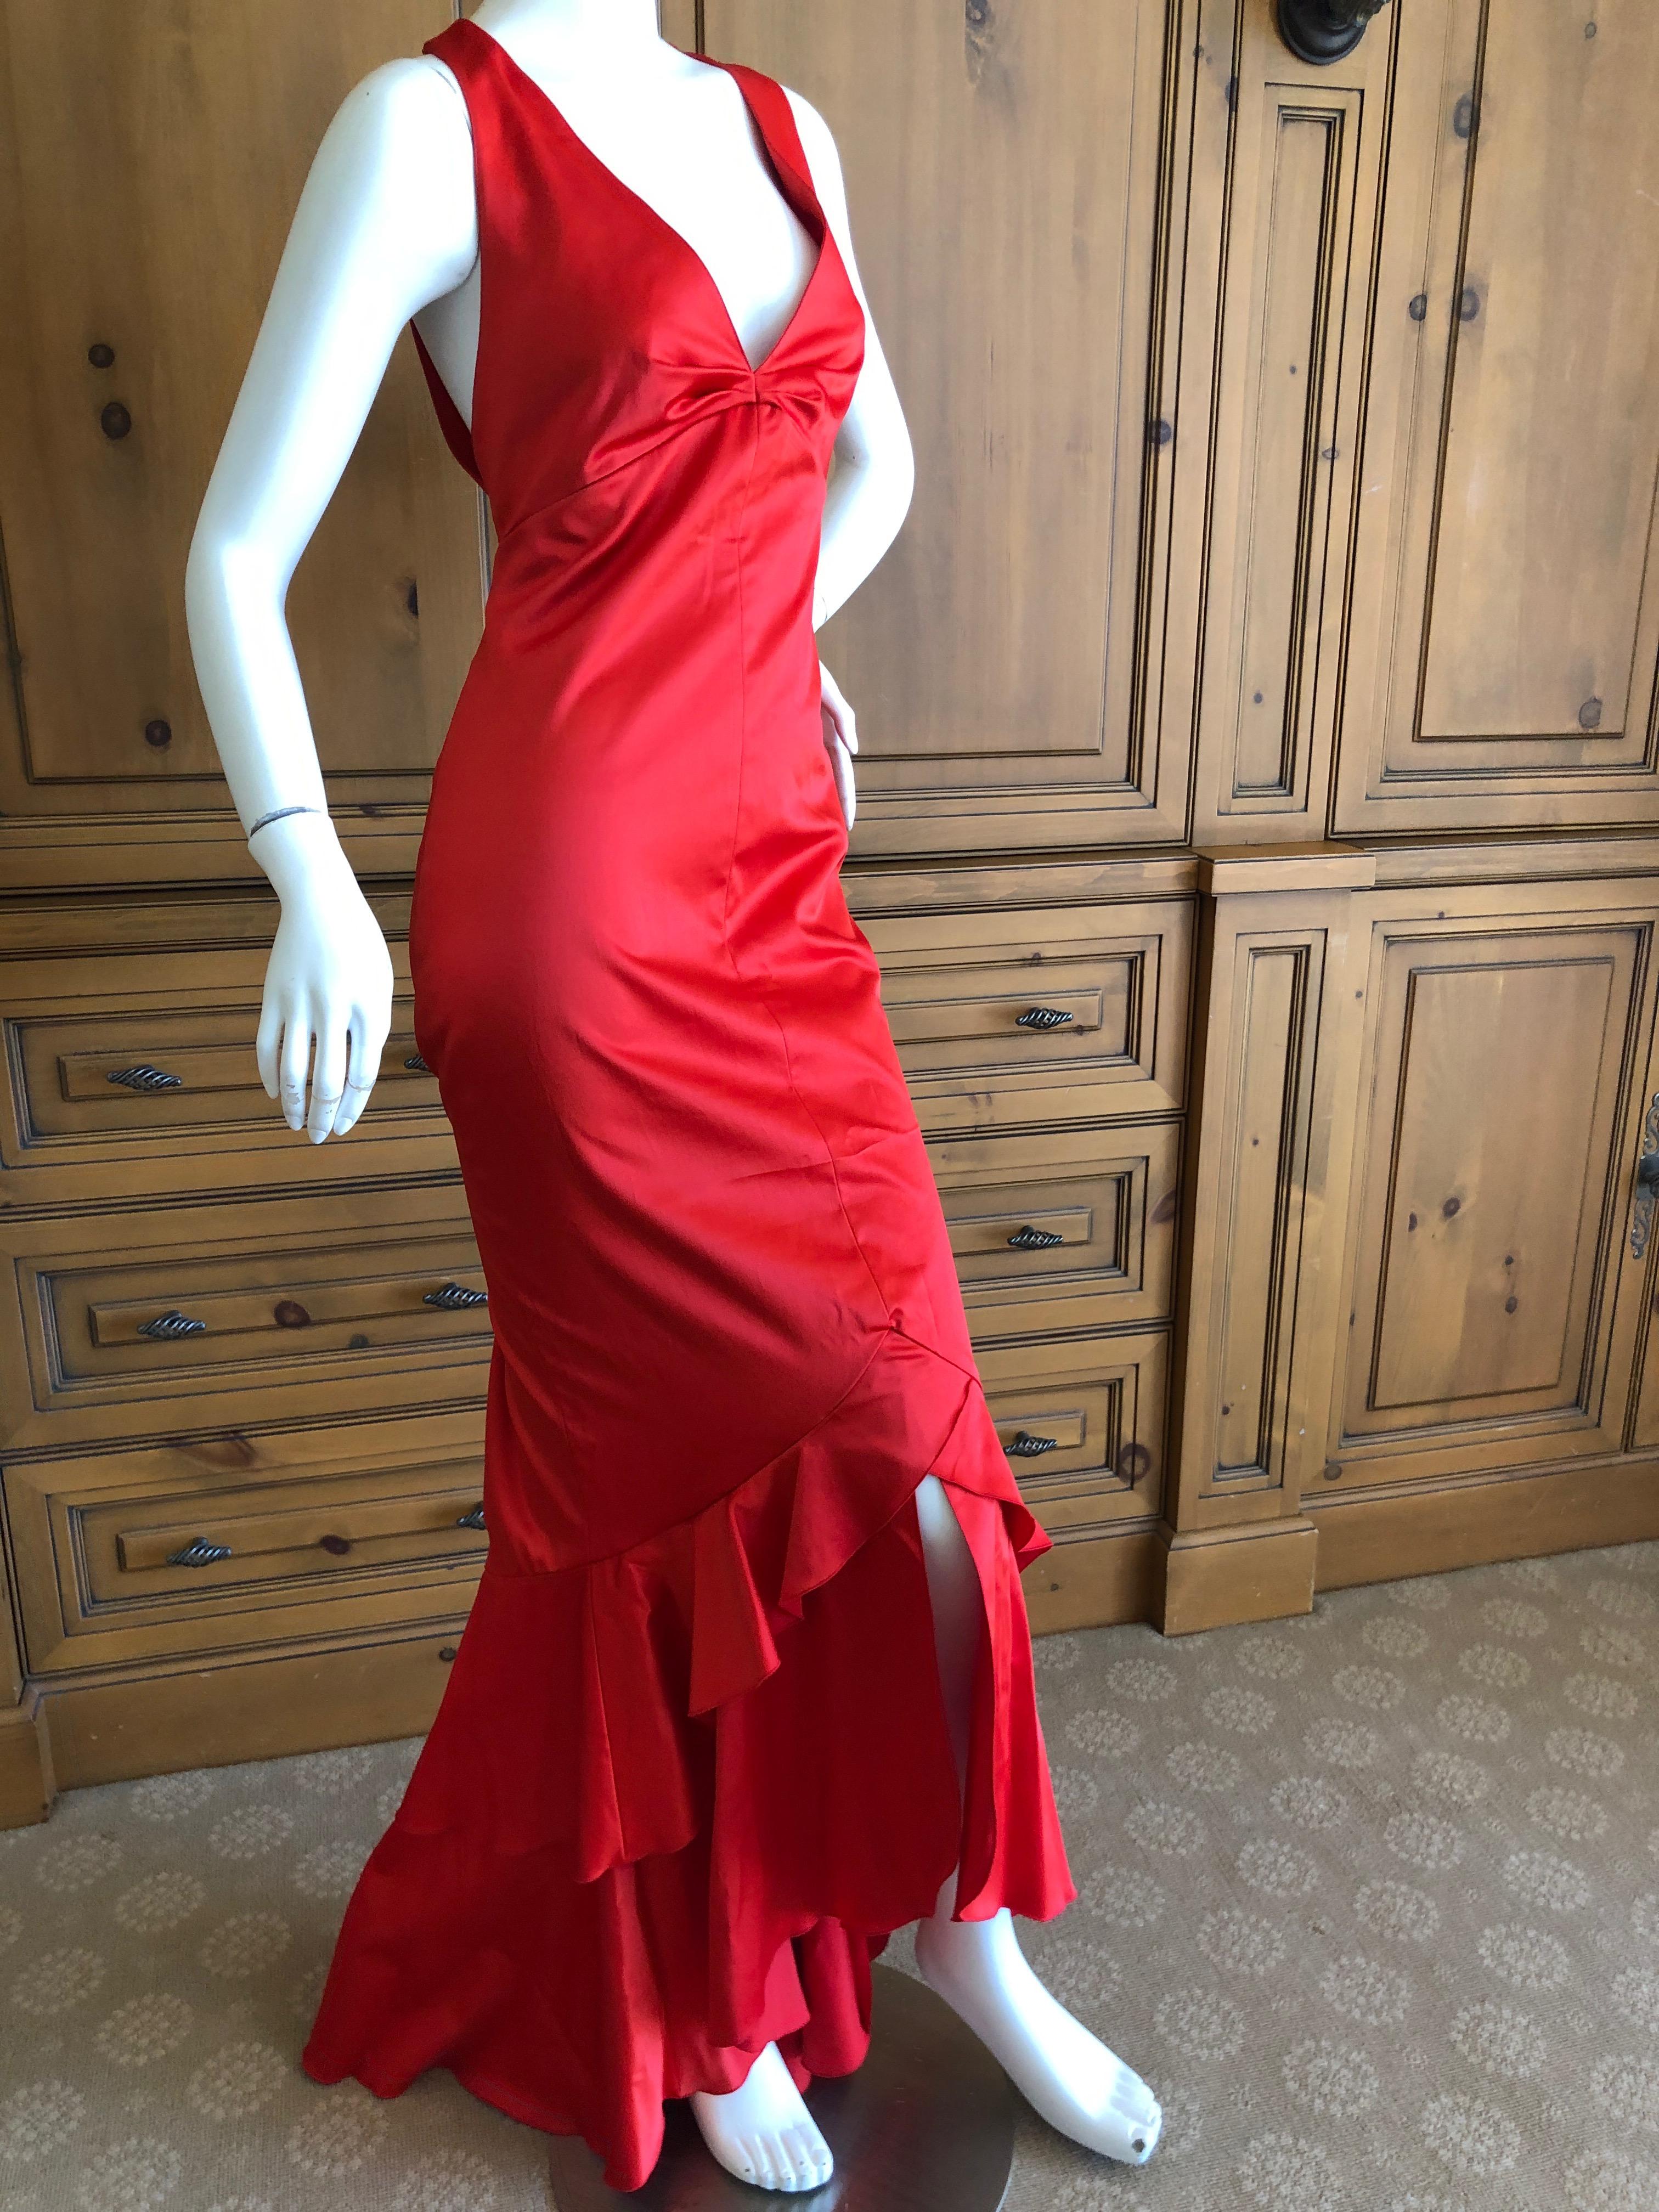 Karl Lagerfeld 1980's Red Evening Dress with Matching Jacket Lagerfeld Gallery 1